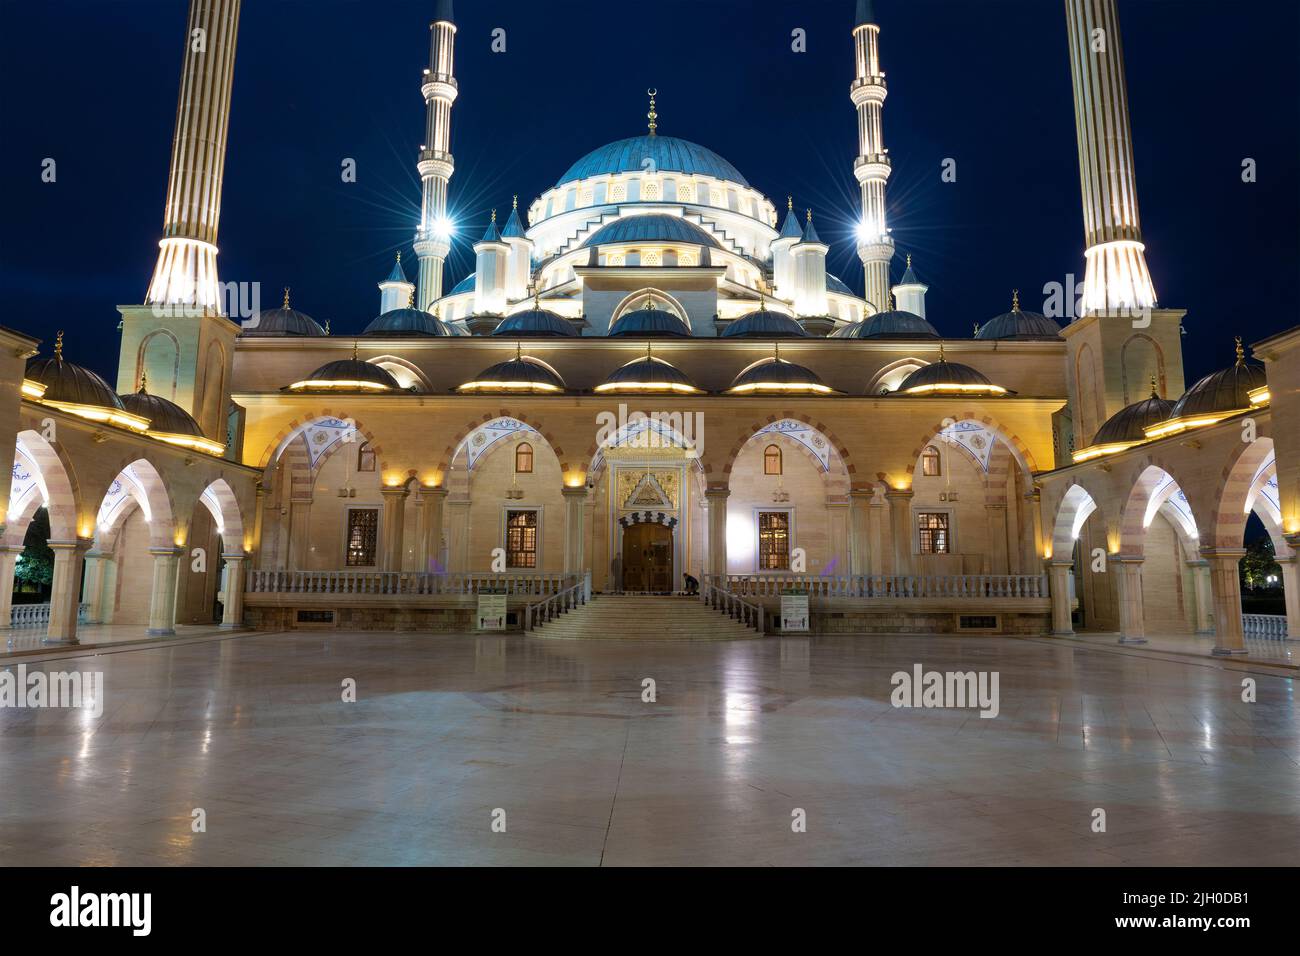 GROZNY, RUSSIA - SEPTEMBER 30, 2021: At the entrance to the Heart of Chechnya mosque on a late September evening Stock Photo